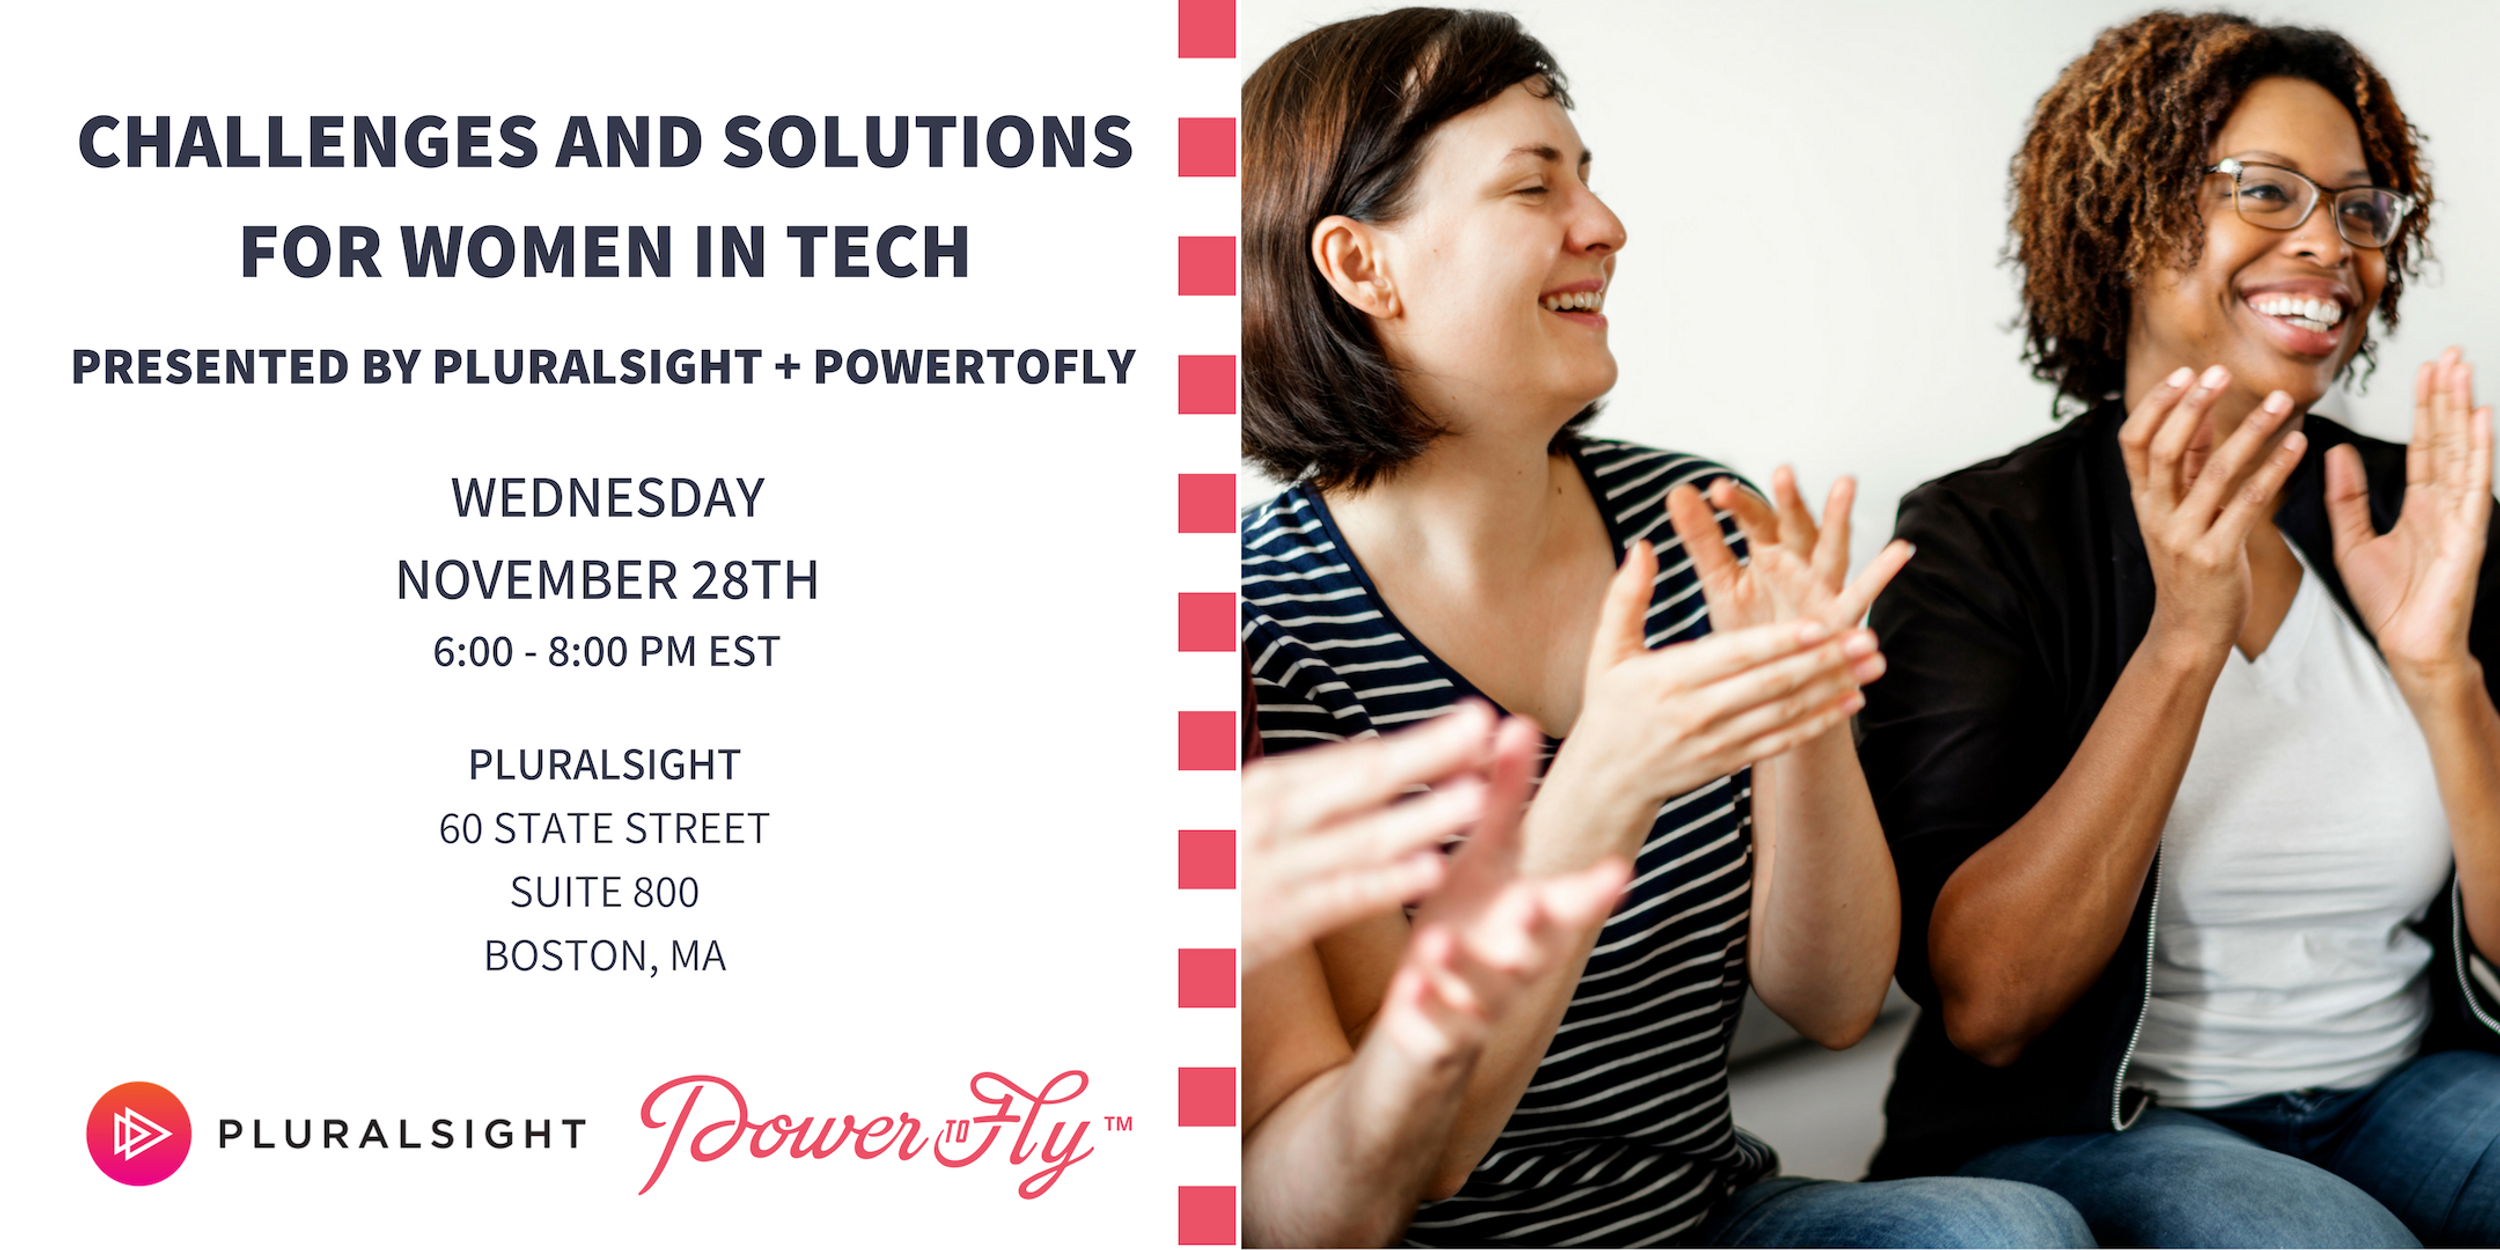 Challenges and Solutions for Women in Tech, presented by Pluralsight + PowerToFly